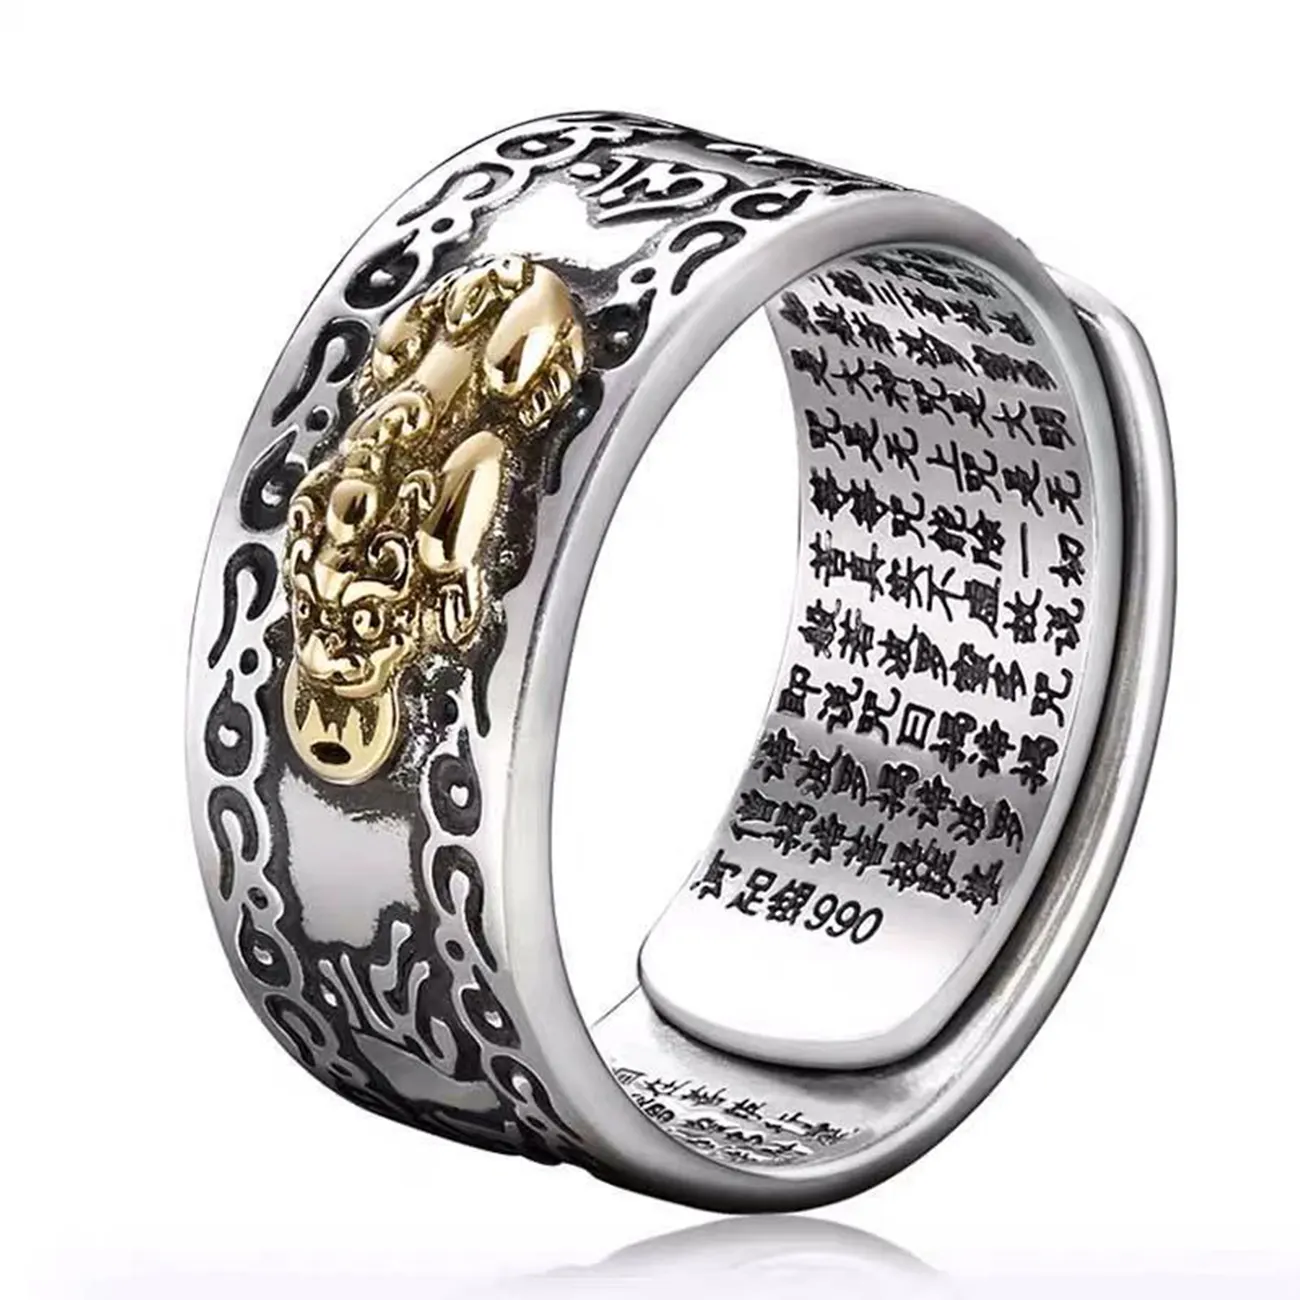 Pixiu Charms Feng Shui Ring Amulet Wealth Lucky Open Adjustable Ring Buddhist Jewelry Ring BHRP031